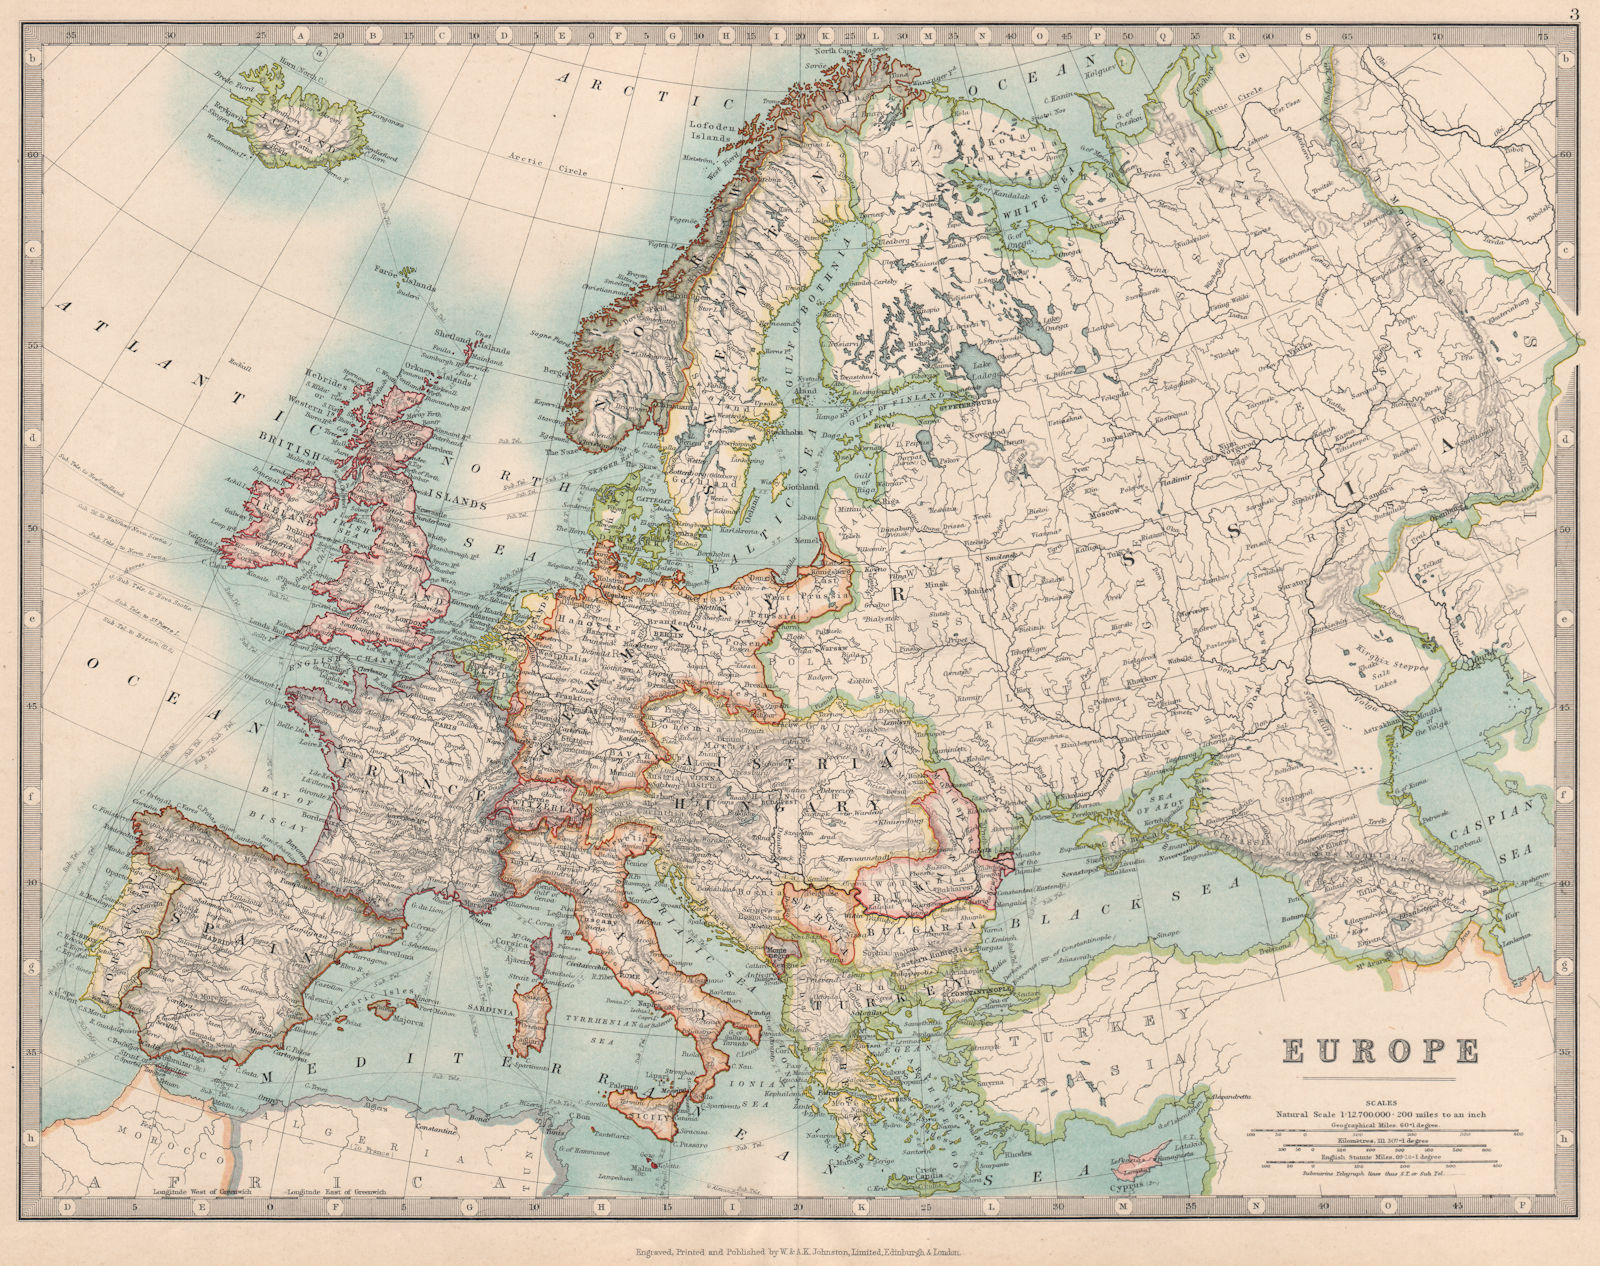 EUROPE shown just before the First World War. JOHNSTON 1912 old antique map